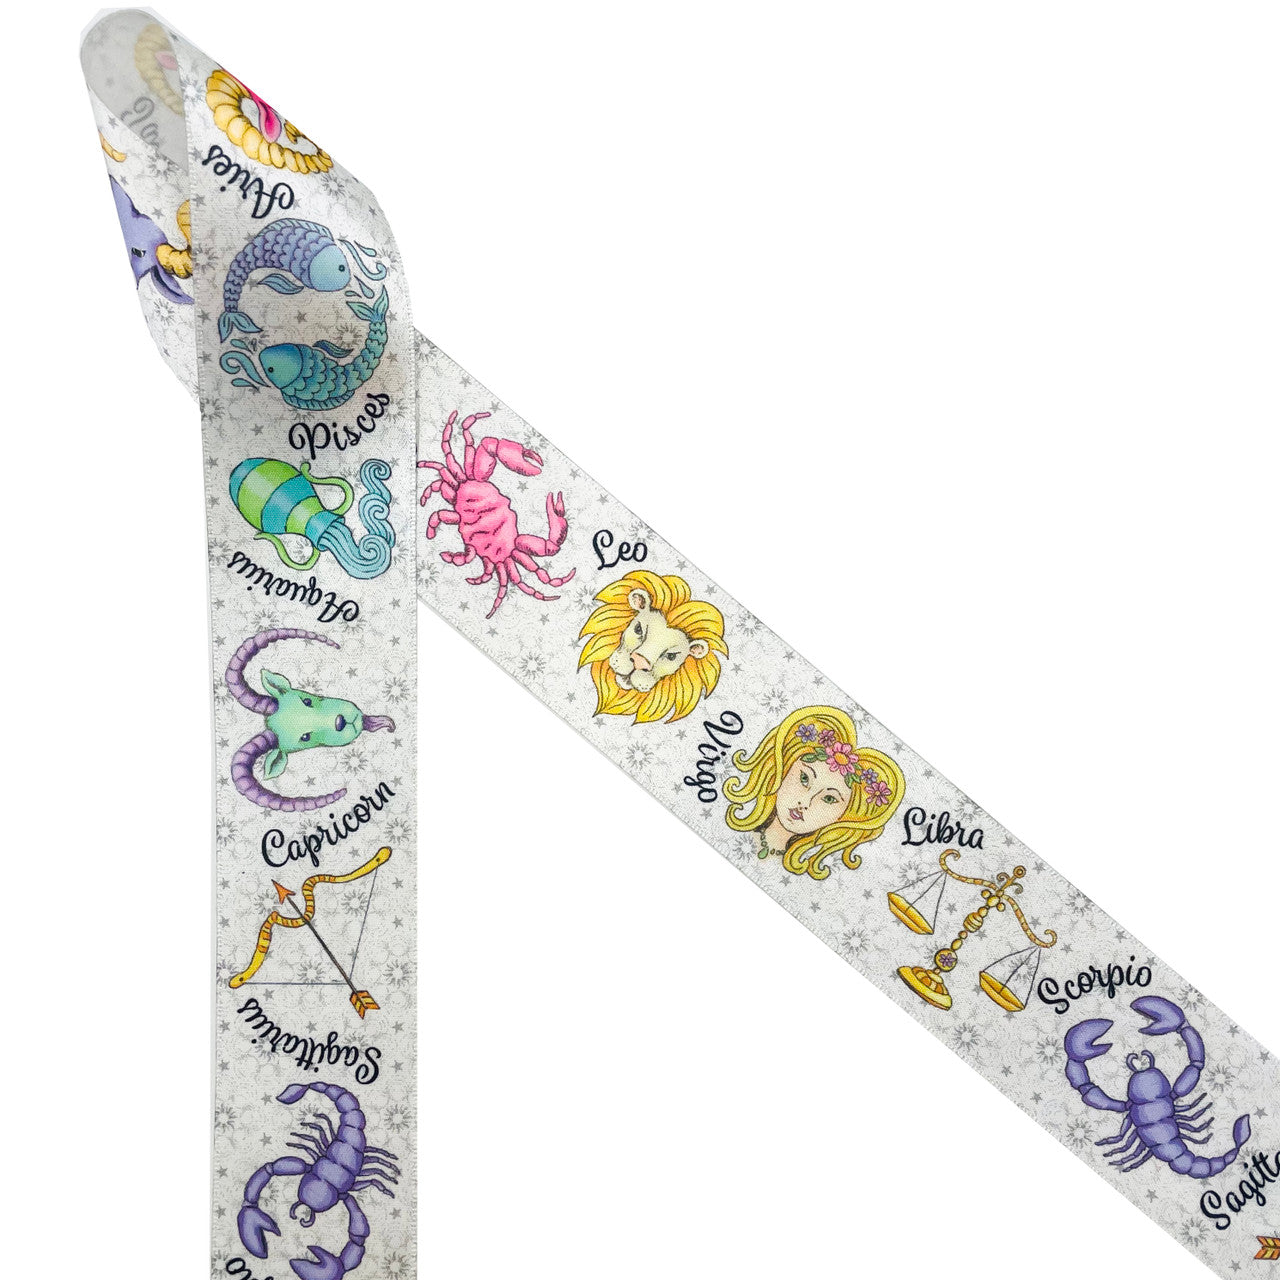 Astrology ribbon with all the Zodiac signs beautifully designed in pastel colors on a gray background with the sun and starts printed on 1.5" white single face satin is a gorgeous addition to any birthday gift for the astrology lover. Use this ribbon on gift wrap, gift baskets, party decor, quilting, craft and sewing projects. This is a fun ribbon for wreathes, costumes headbands and fascinators with an astrological theme. All our ribbons are designed and printed in the USA